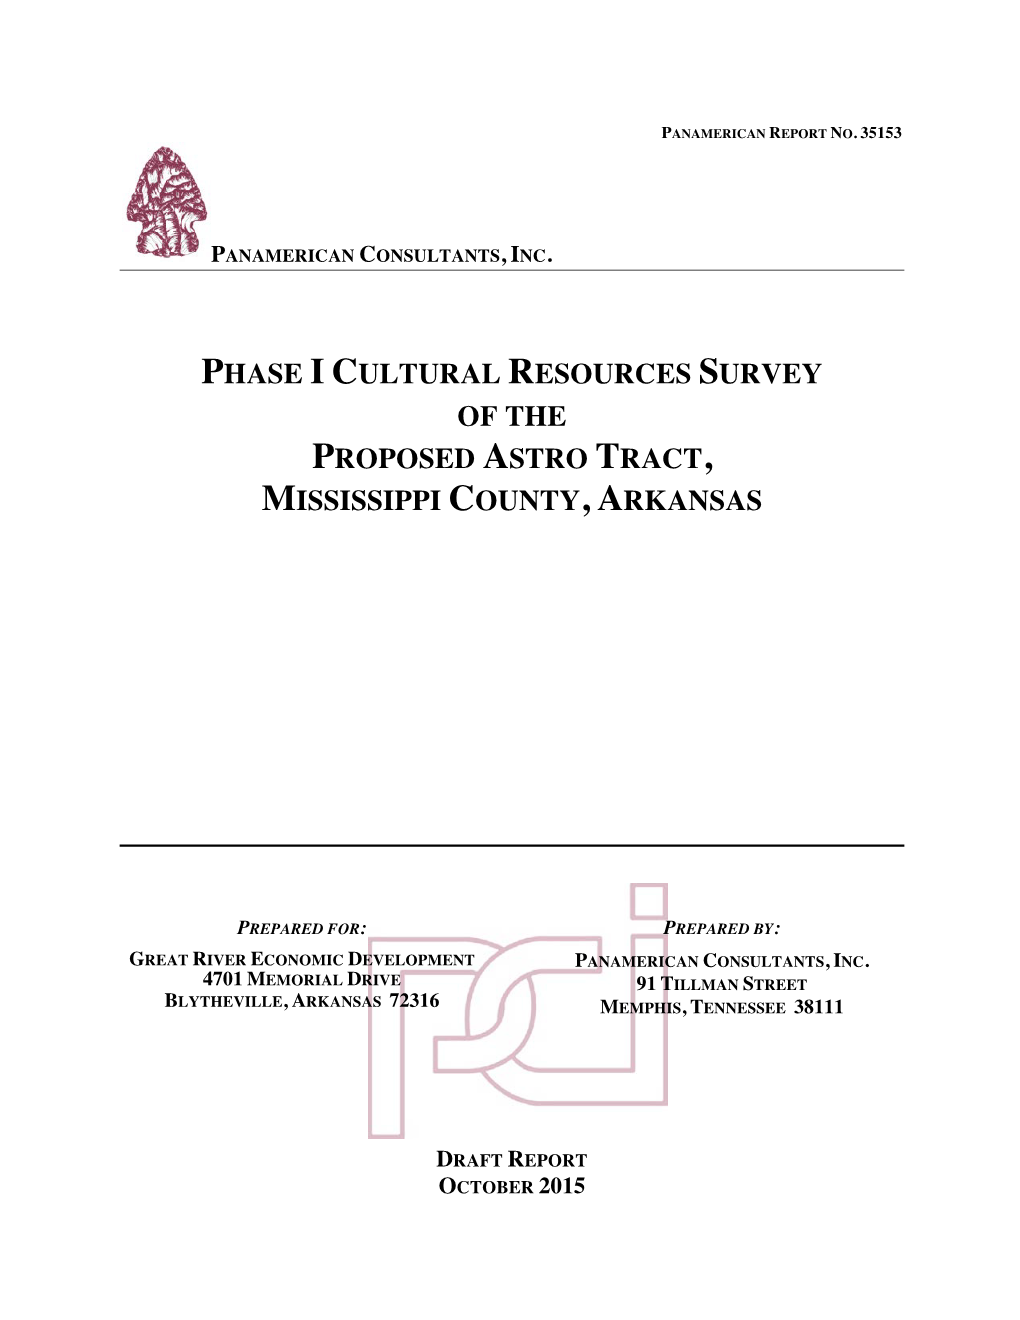 Phase I Cultural Resources Survey of the Proposed Astro Tract, Mississippi County, Arkansas